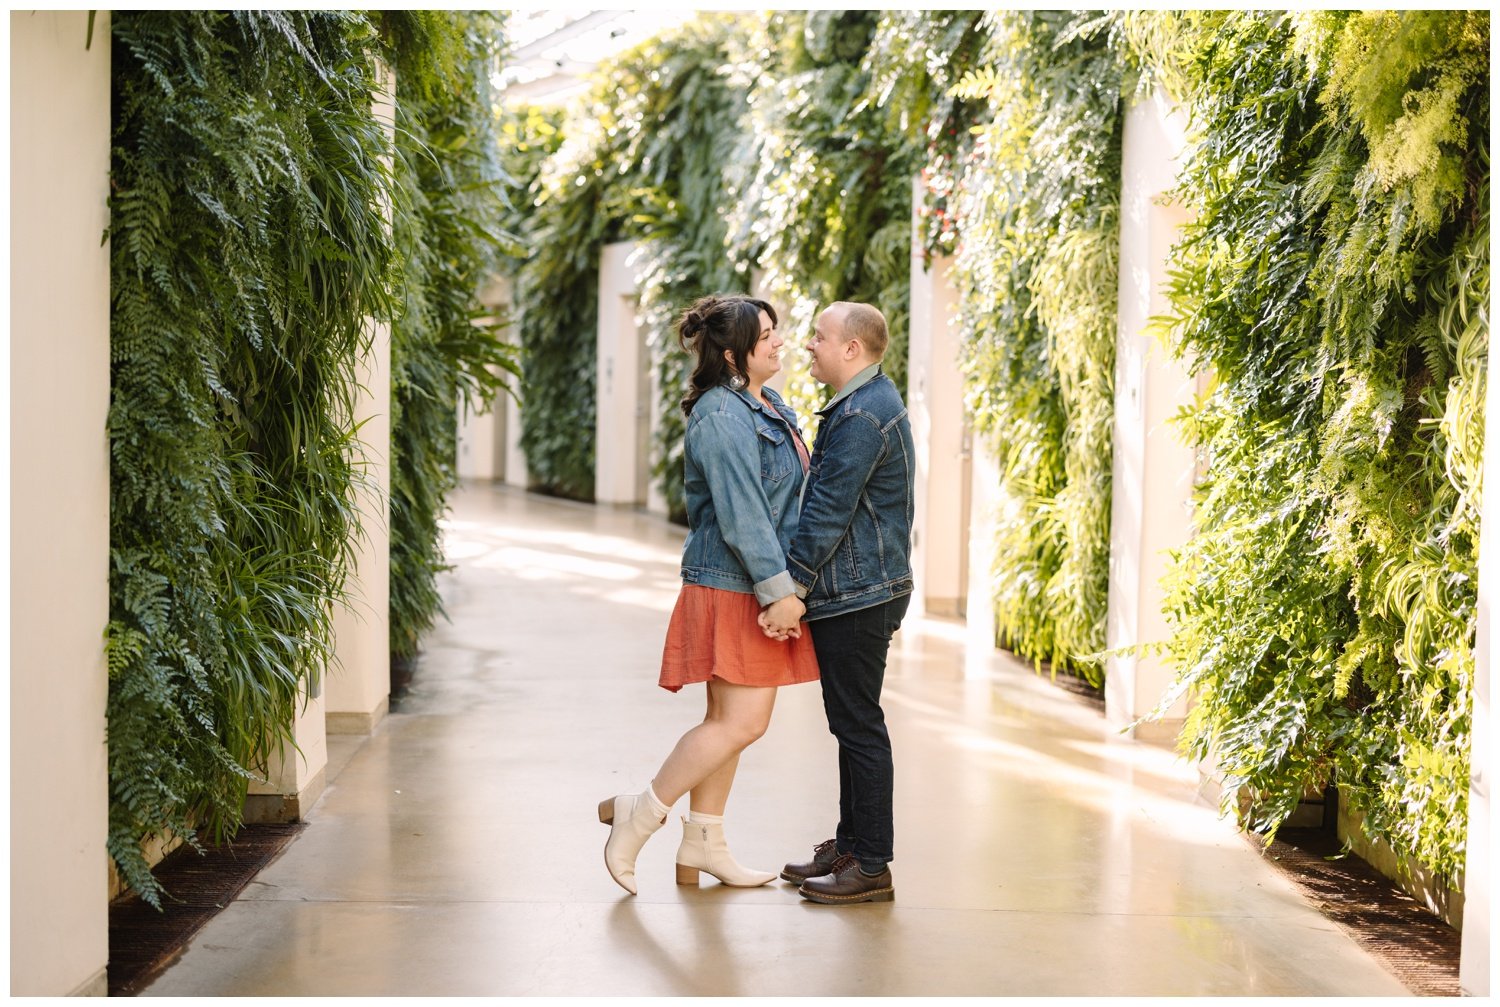 Queer-Engagement-Photo-Inspiration-Philly-Area-Photographer-Longwood-Gardens-8.jpg